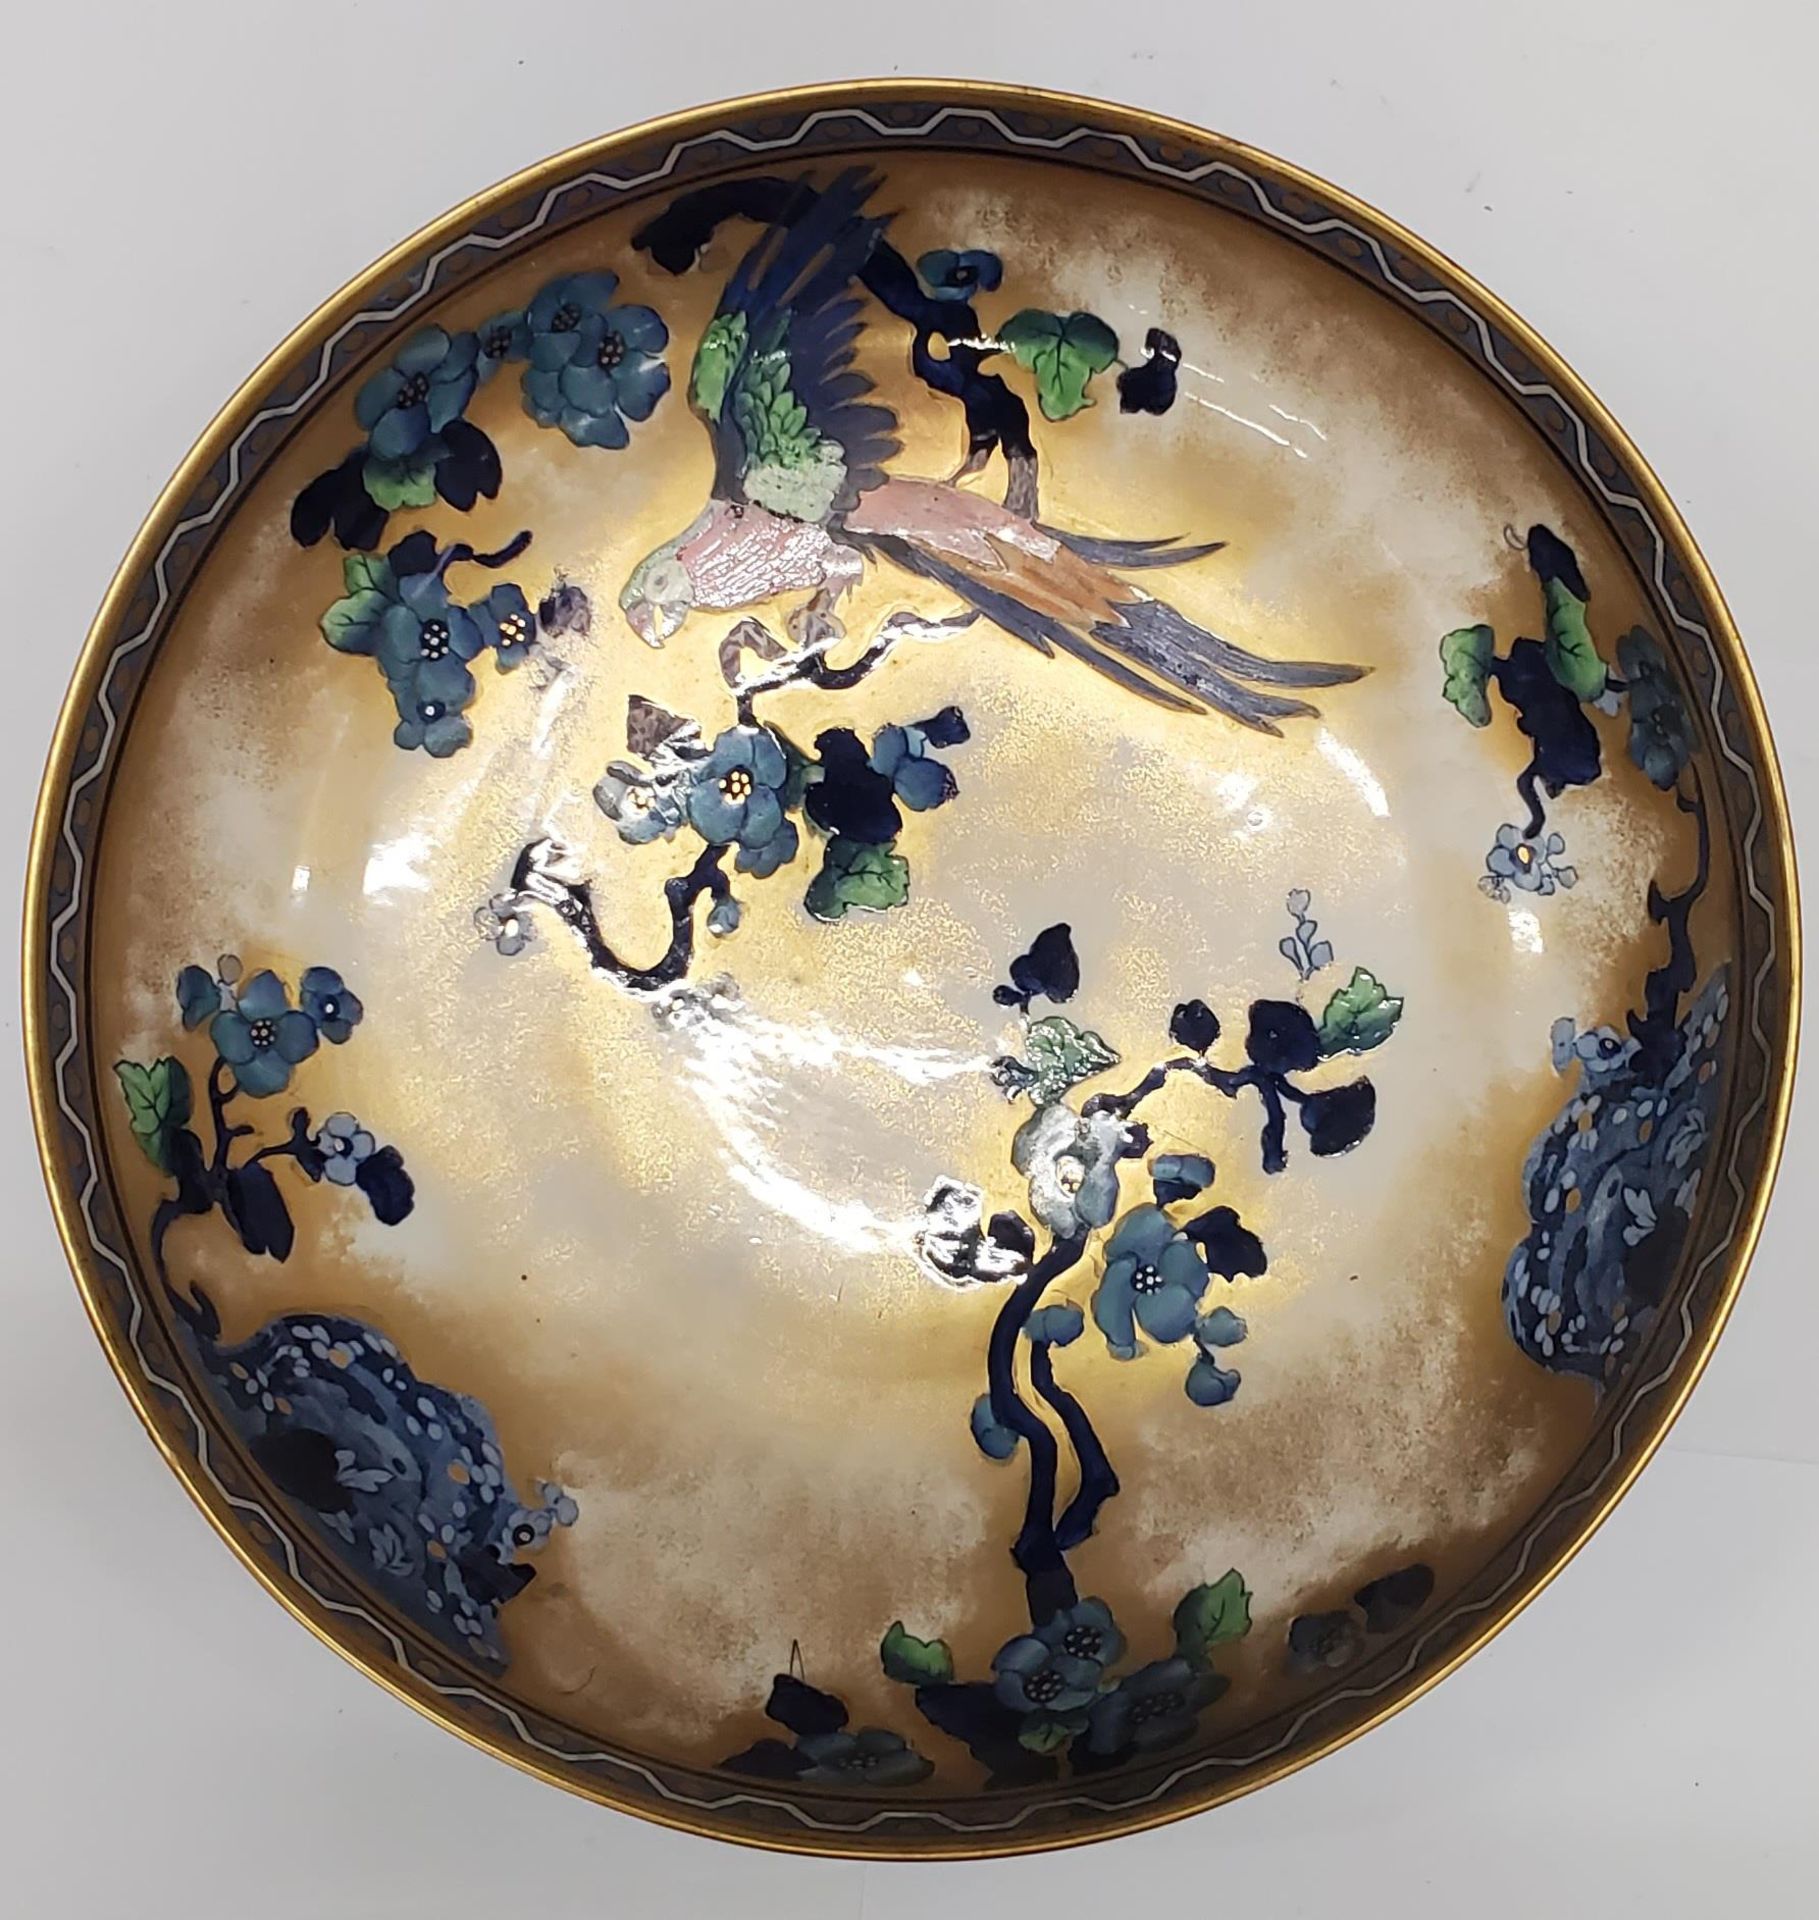 TWO LARGE LOSOL WARE BOWLS DECORATED WITH PARROTS AND FOLIAGE - Image 2 of 5